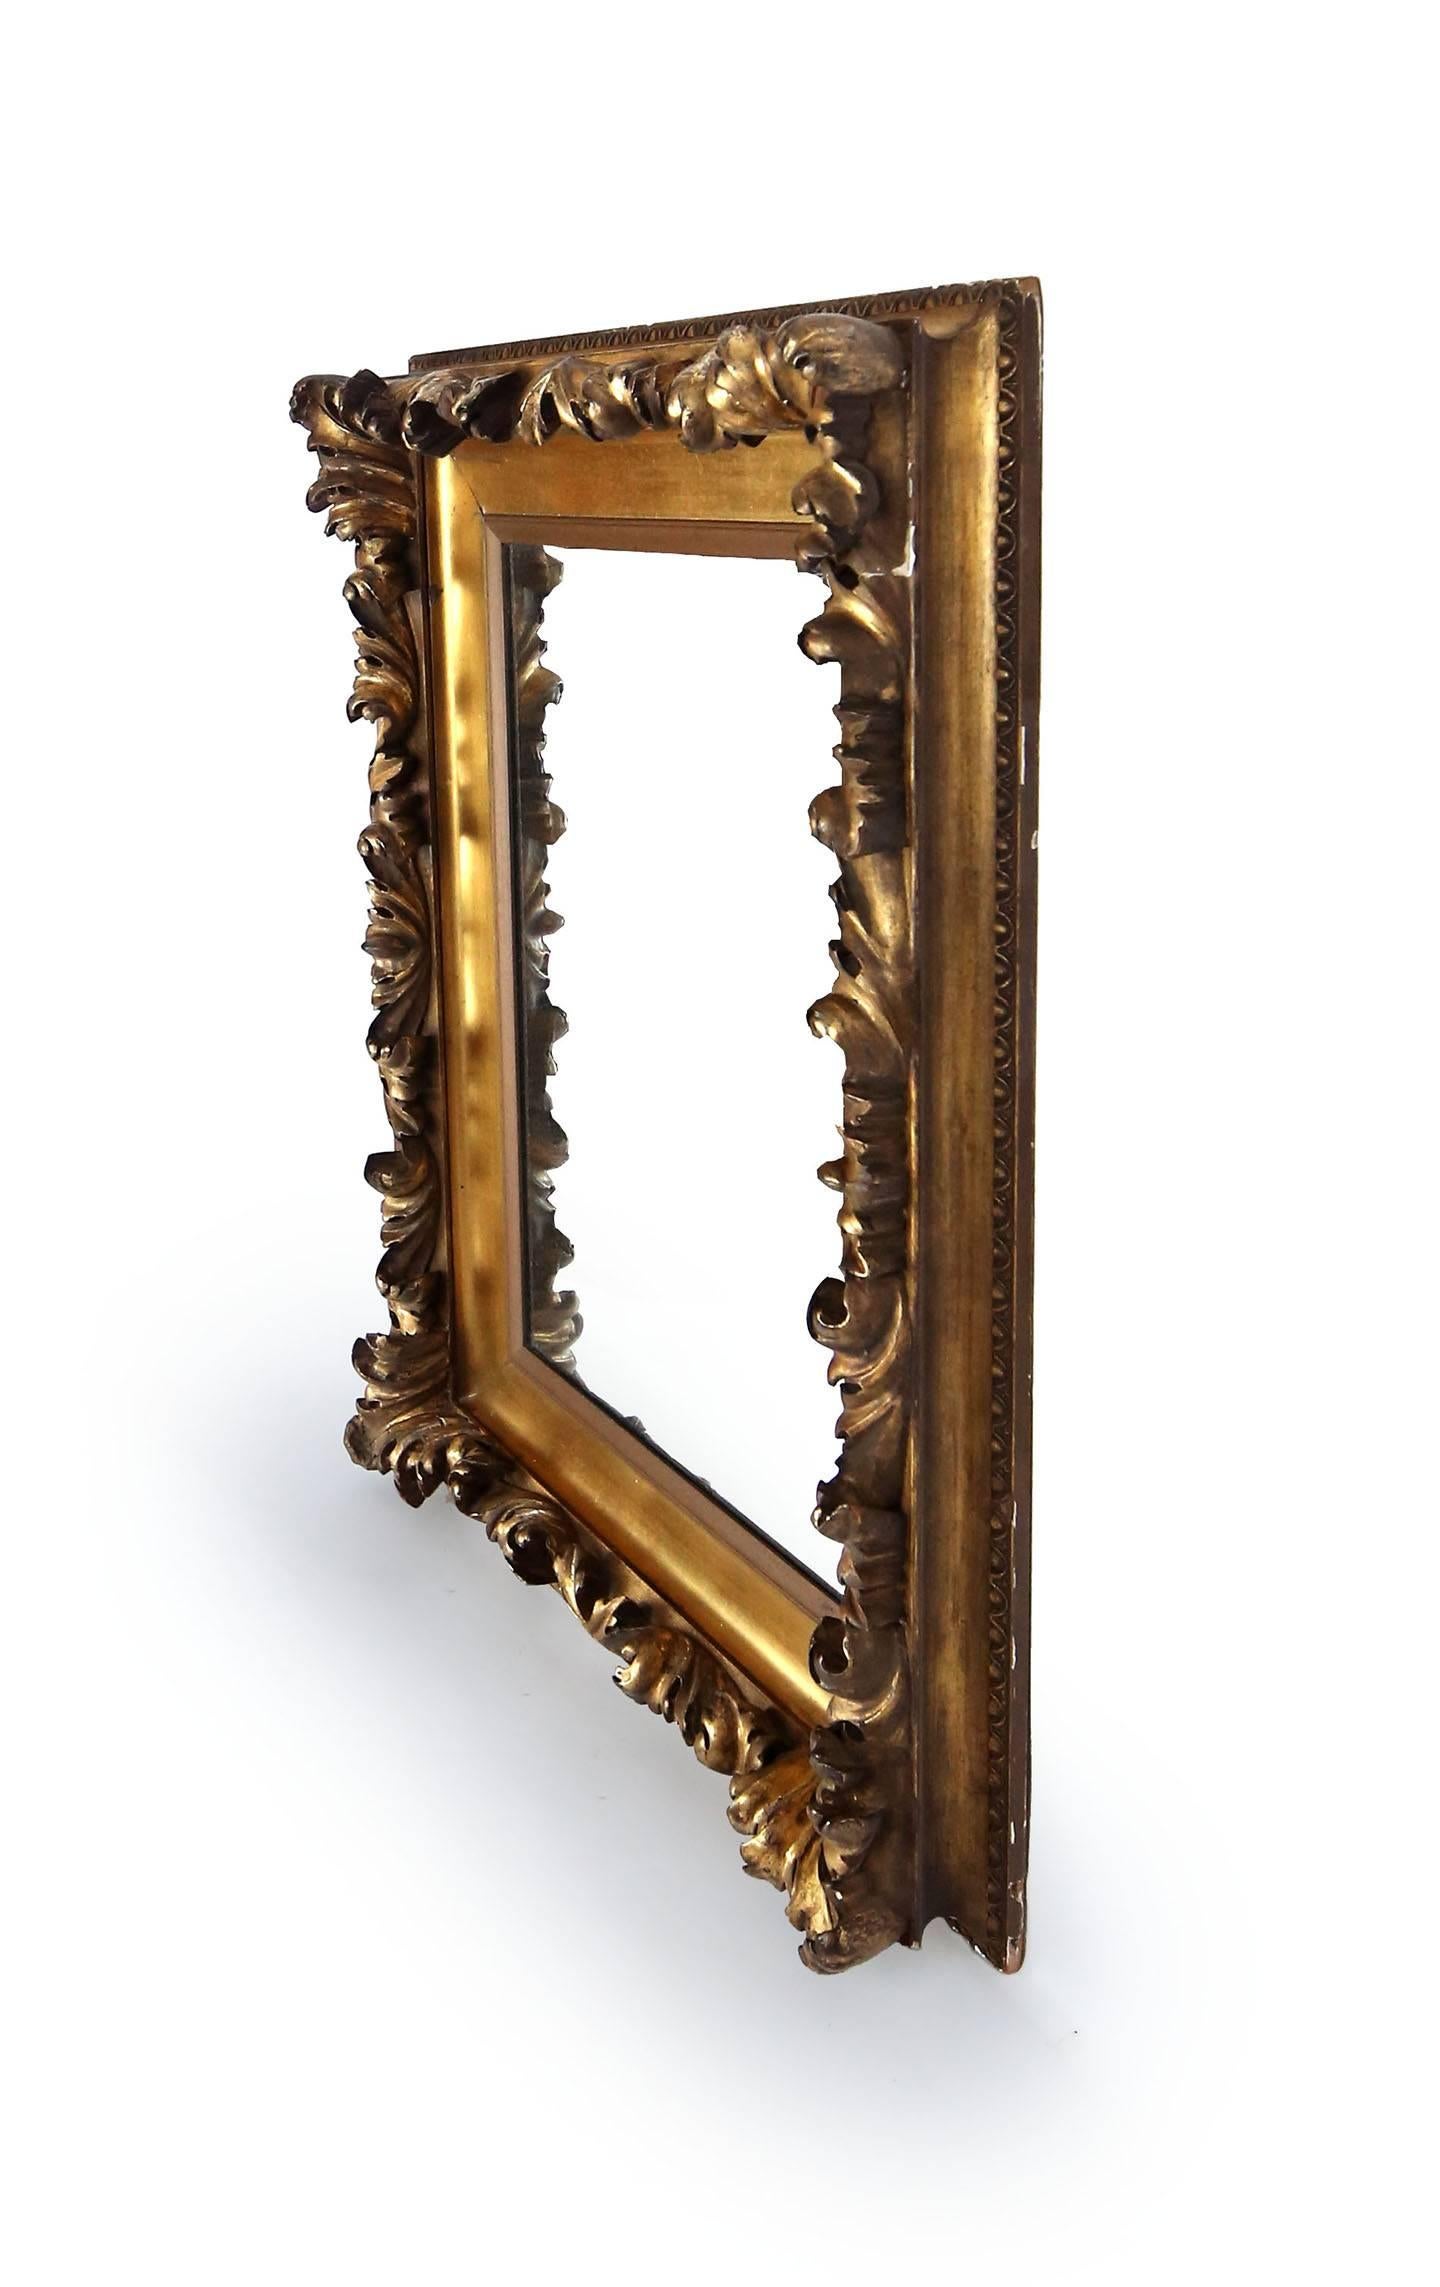 Richly carved water gilt mirror with acanthus leaves and chunky gadrooned edge. The outer frame is banded by small egg and dart molding. A fine art frame converted to looking glass. American, circa 1870.